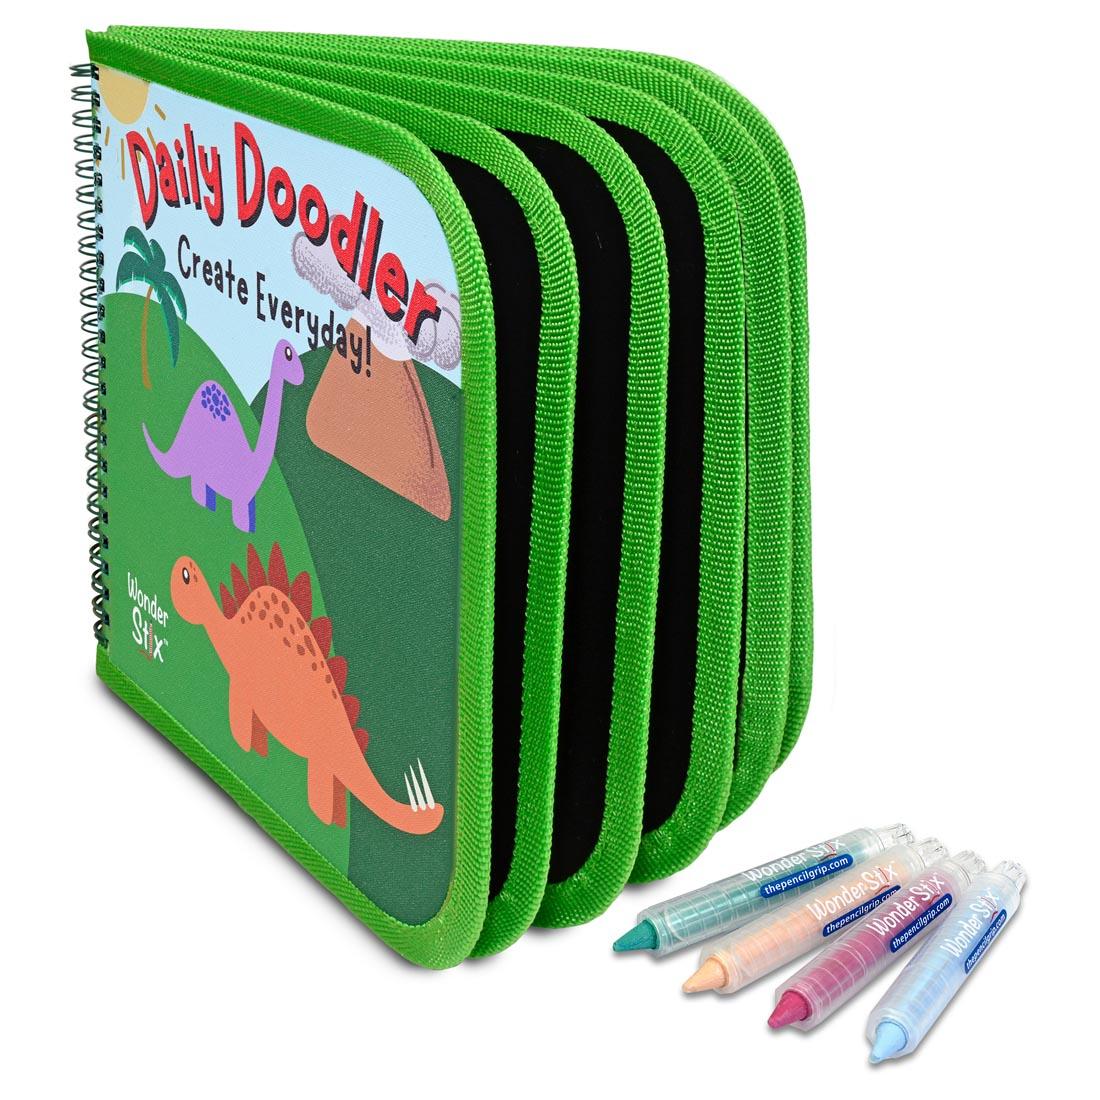 Dino Daily Doodler Reusable Activity Book standing up with four Wonder Stix